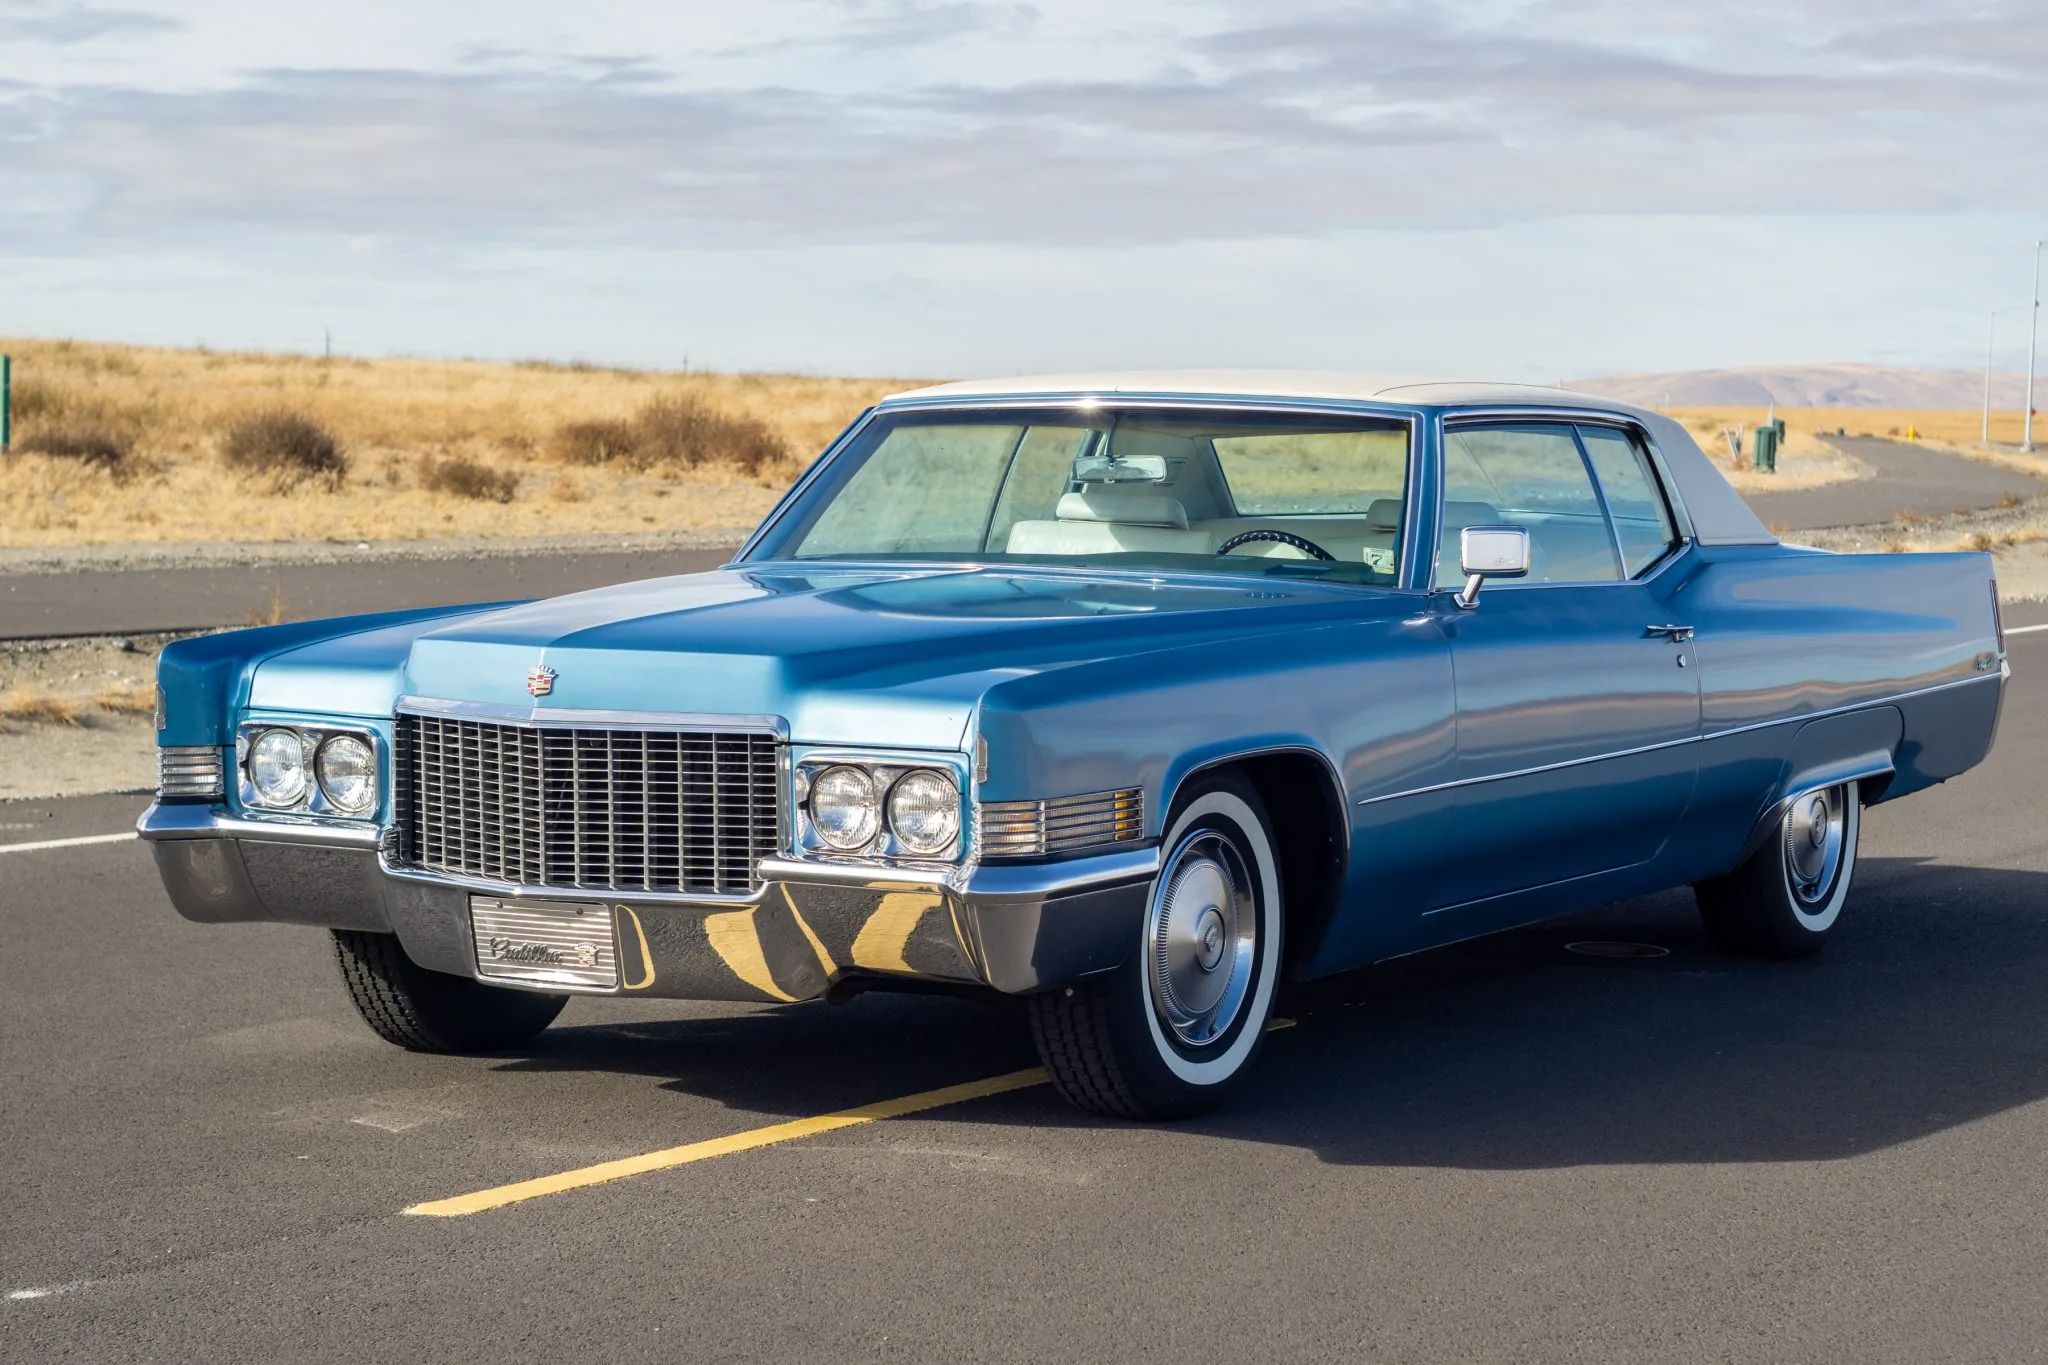 Cadillac Coupe Deville from 1970